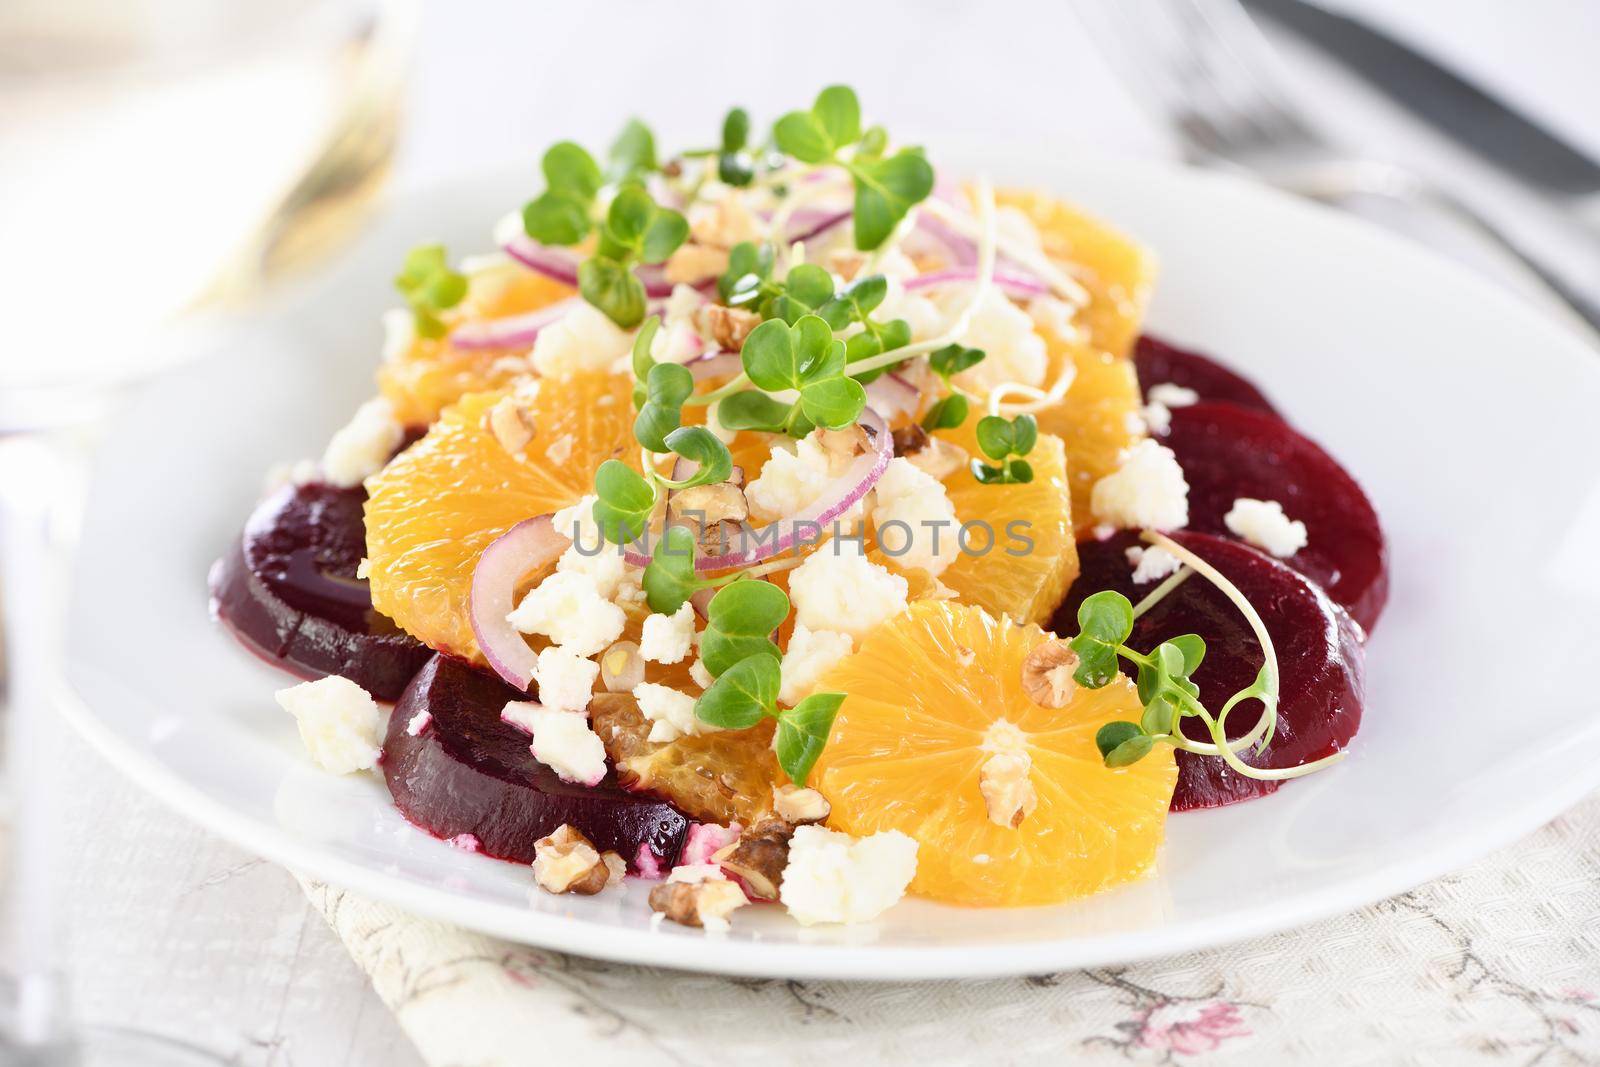 Orange salad with baked beetroot, goat cheese, microgreens and nuts. Perfect as a side dish or as a light lunch for a brunch or dinner.